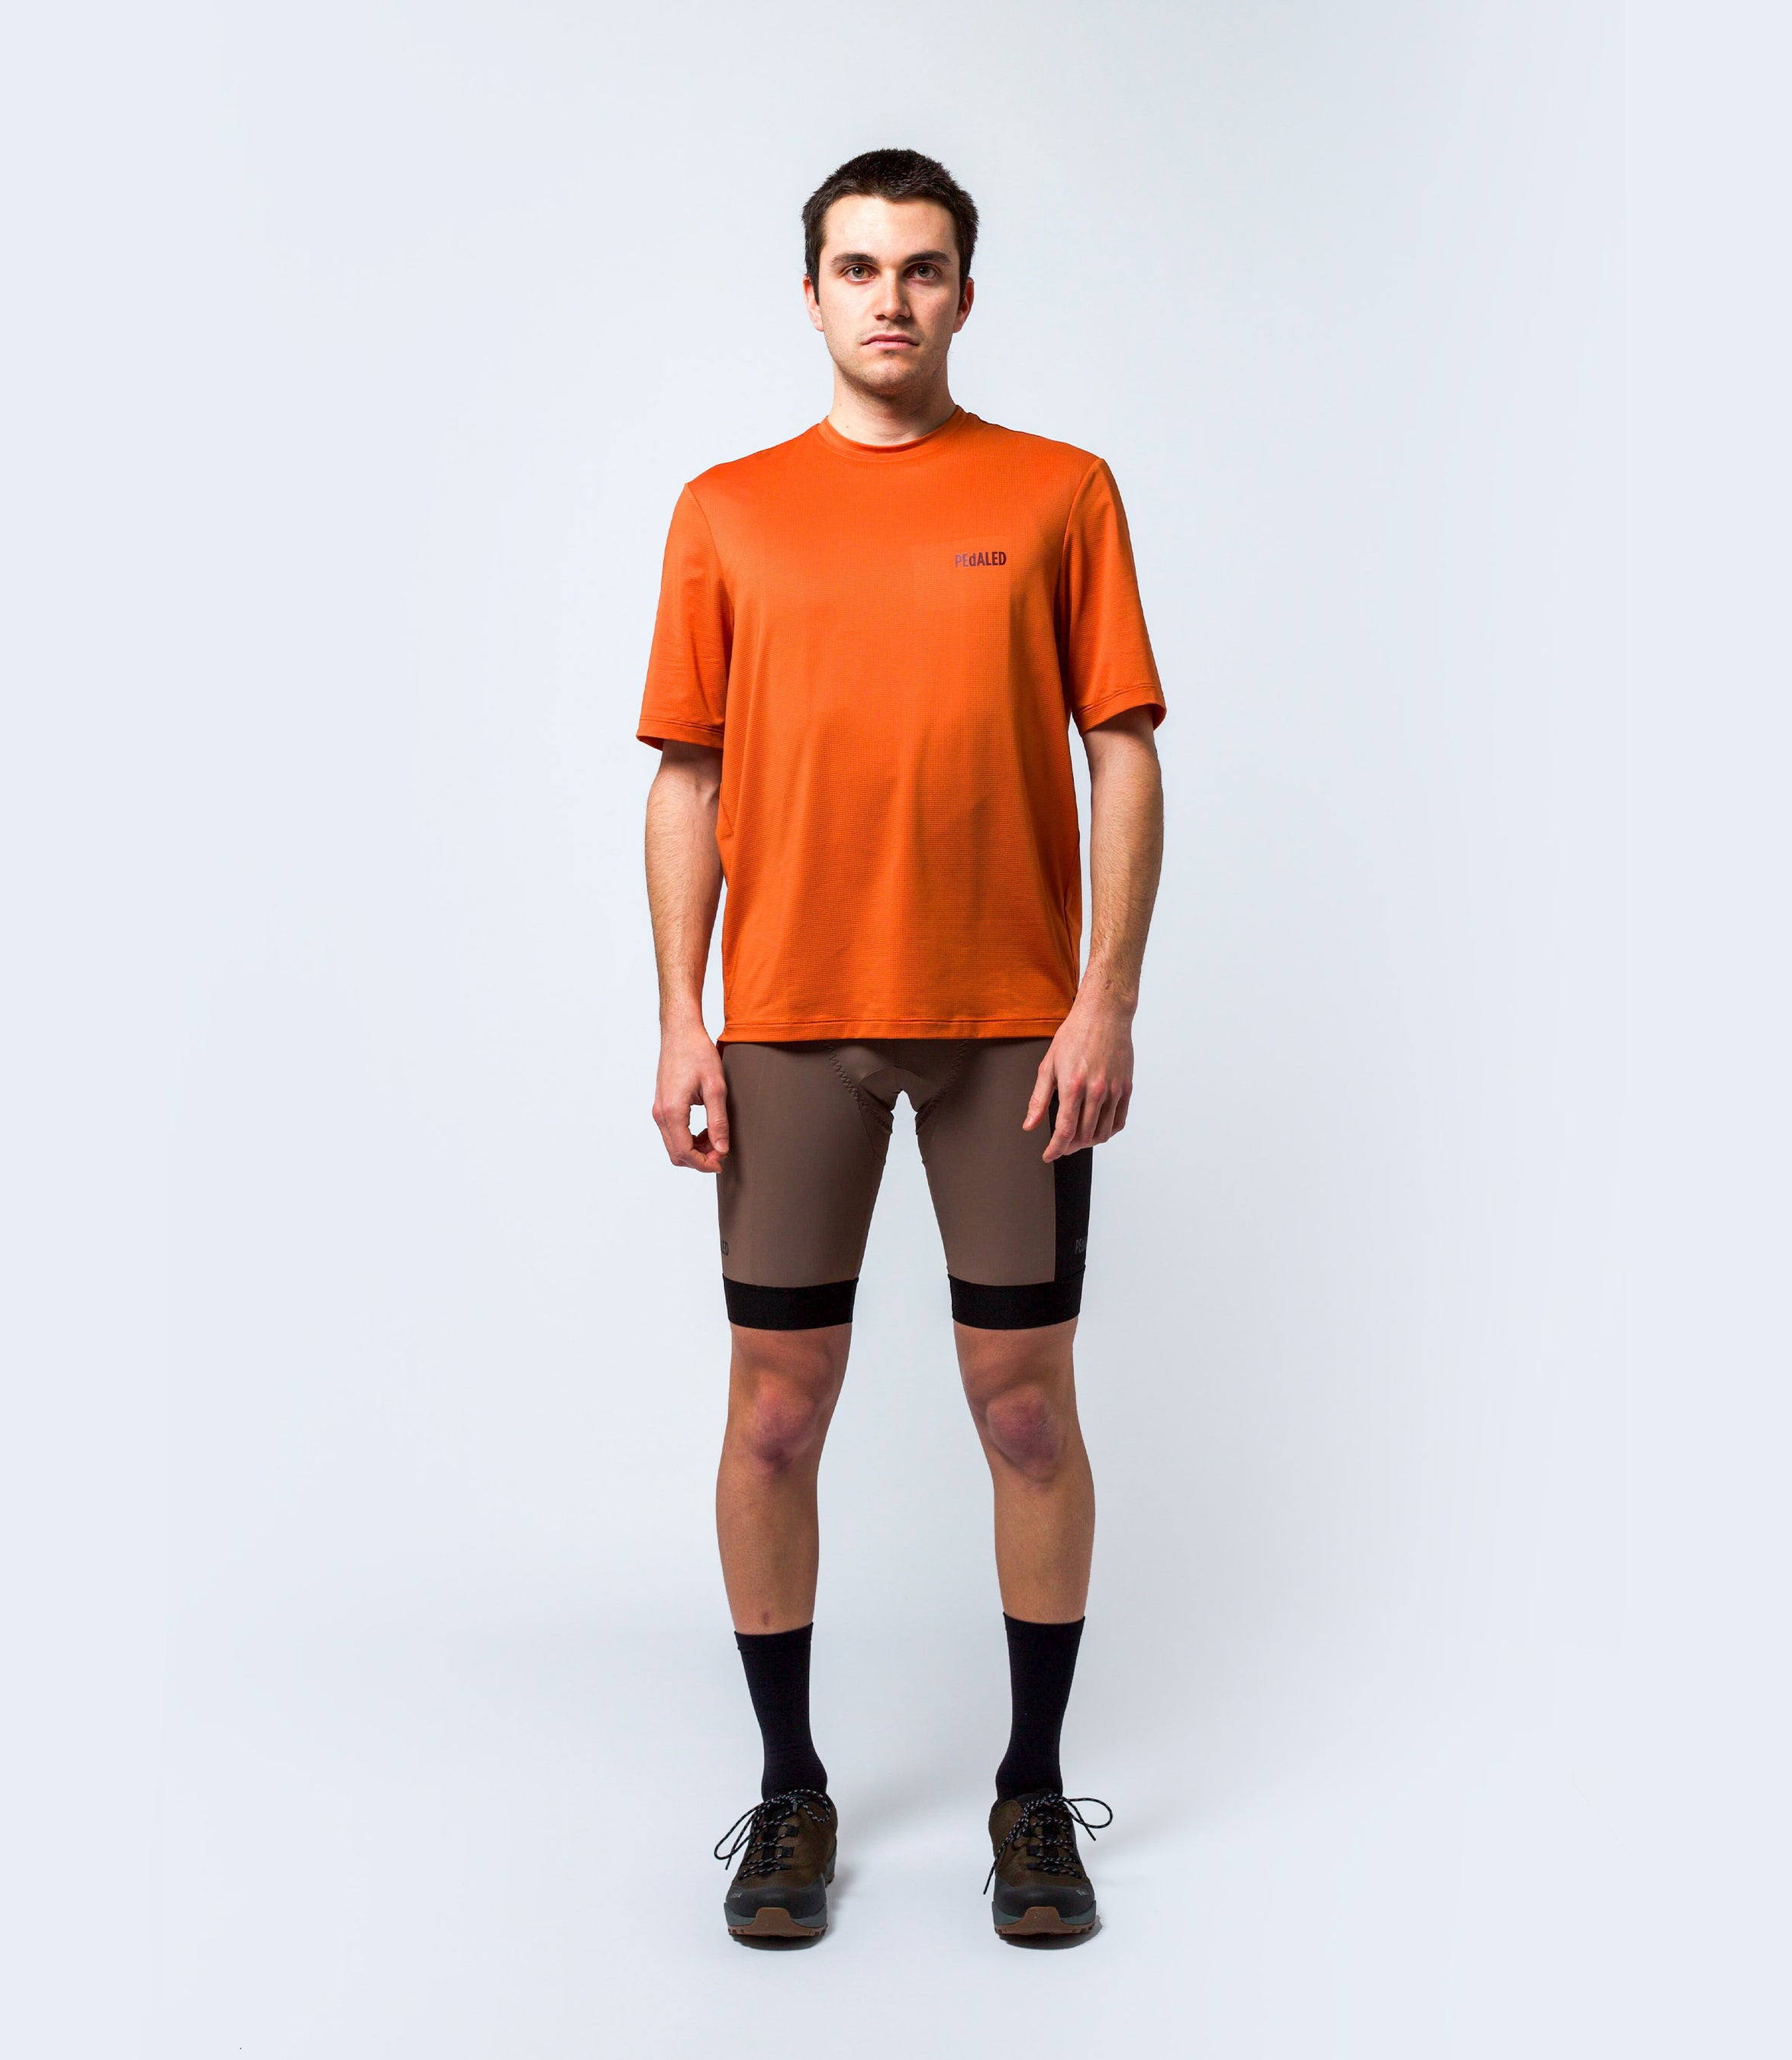 23STSJA0HPE_3_cycling gravel tech tee orange jary total body front pedaled